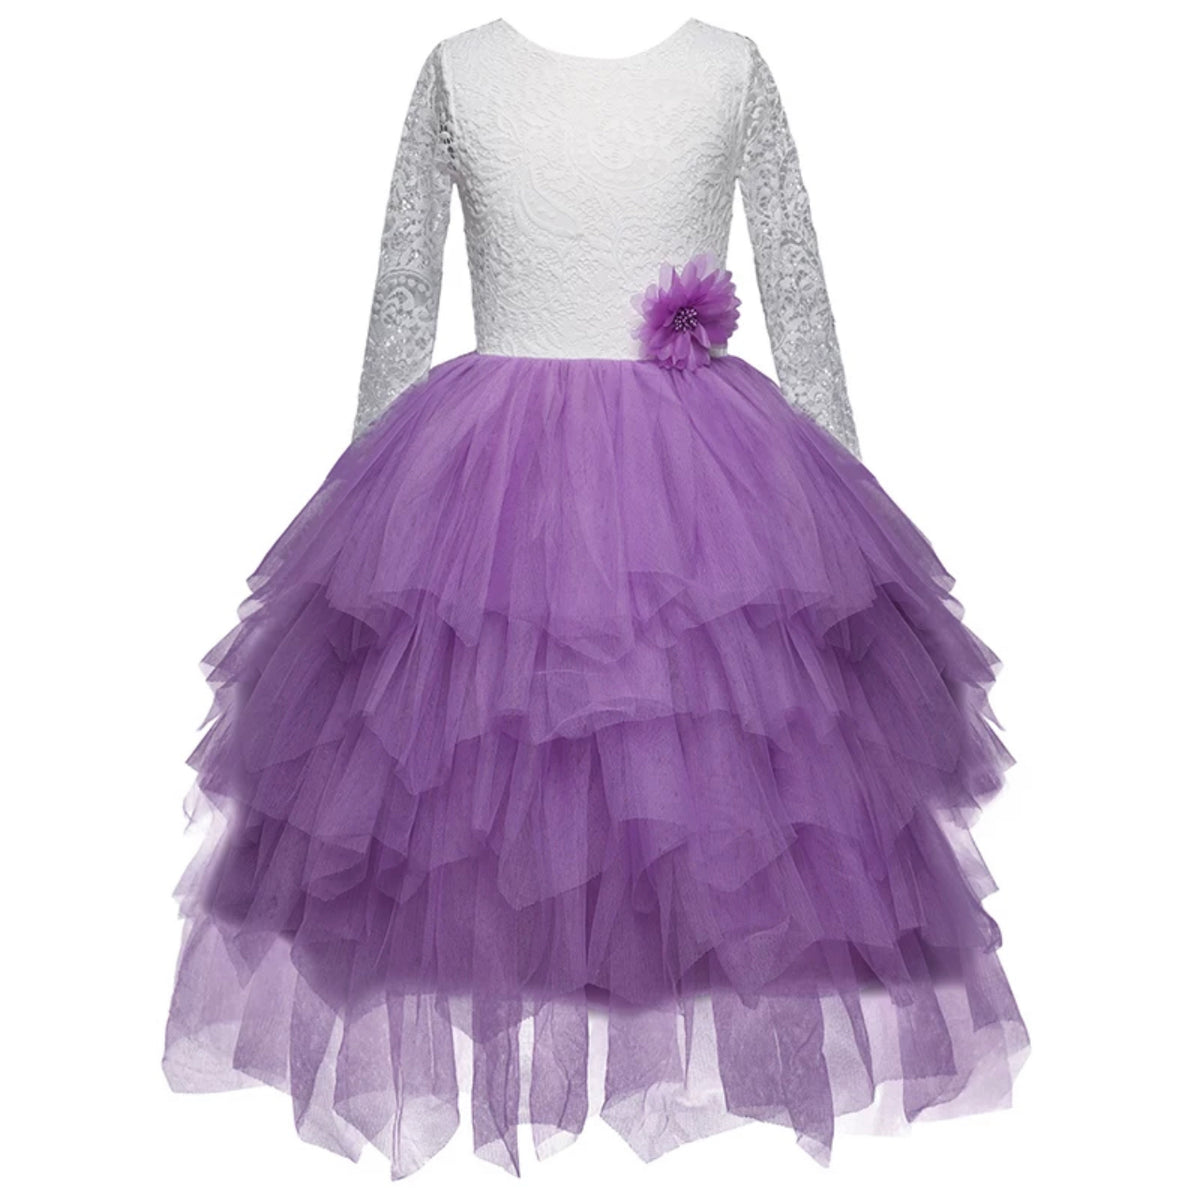 Purple Long Sleeved Lacey Tulle Dress